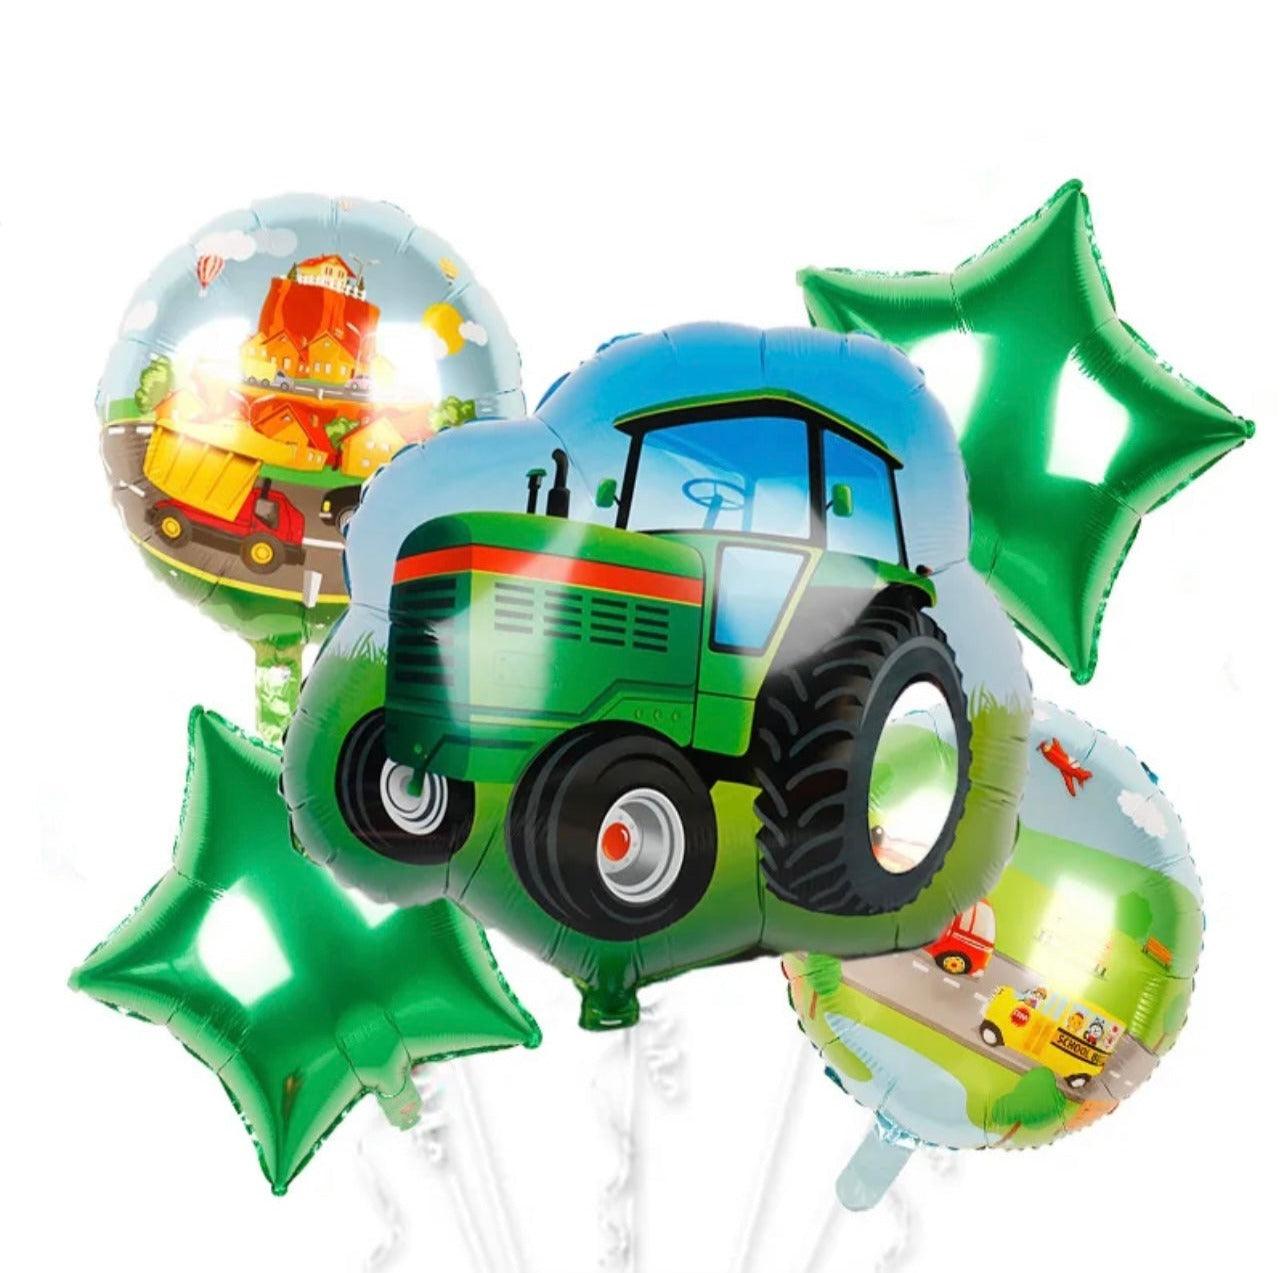 Tractor and Digger Balloons - Expat Life Style